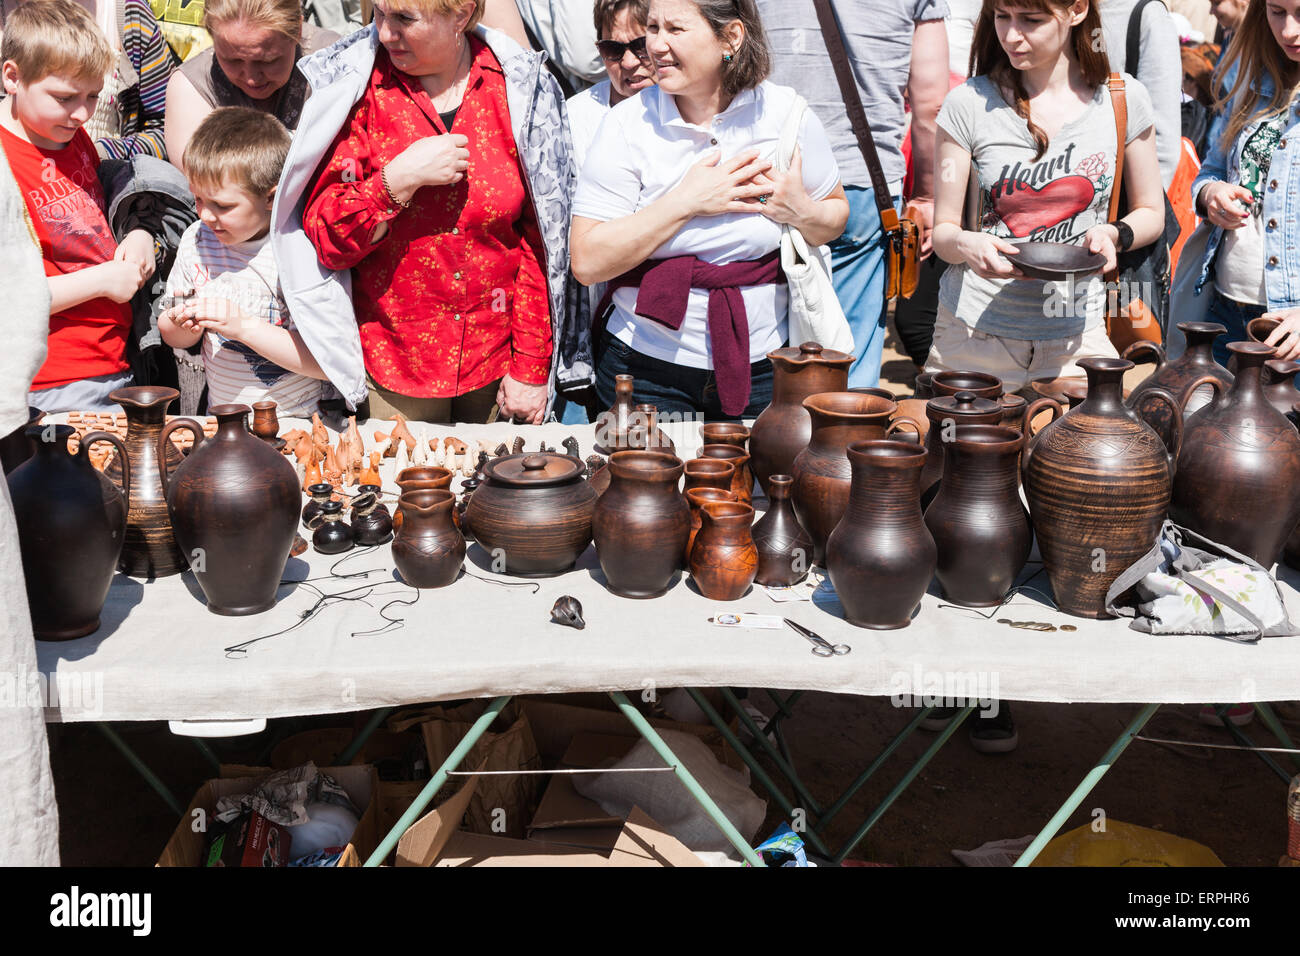 Moscow, Russia, Saturday, June 6th, 2015. Annual Times and Epochs festival was opened in Moscow on Saturday, June 6, 2015. The festival is devoted to the period of classical antiquity this year. Ancient Rome, Greece, Judaea, Germany, Bosporus kingdom as well as Celtic and Scythian tribes are represented. Teams and clubs from many regions and cities of Russia as well as from Italy, Greece, France, Romania, Switzerland, Holland, Poland, Moldova, Belarus, Ukraine took part in the event. Editorial, illustrative use only. Buying Roman pottery for home. Credit:  Alex's Pictures/Alamy Live News Stock Photo